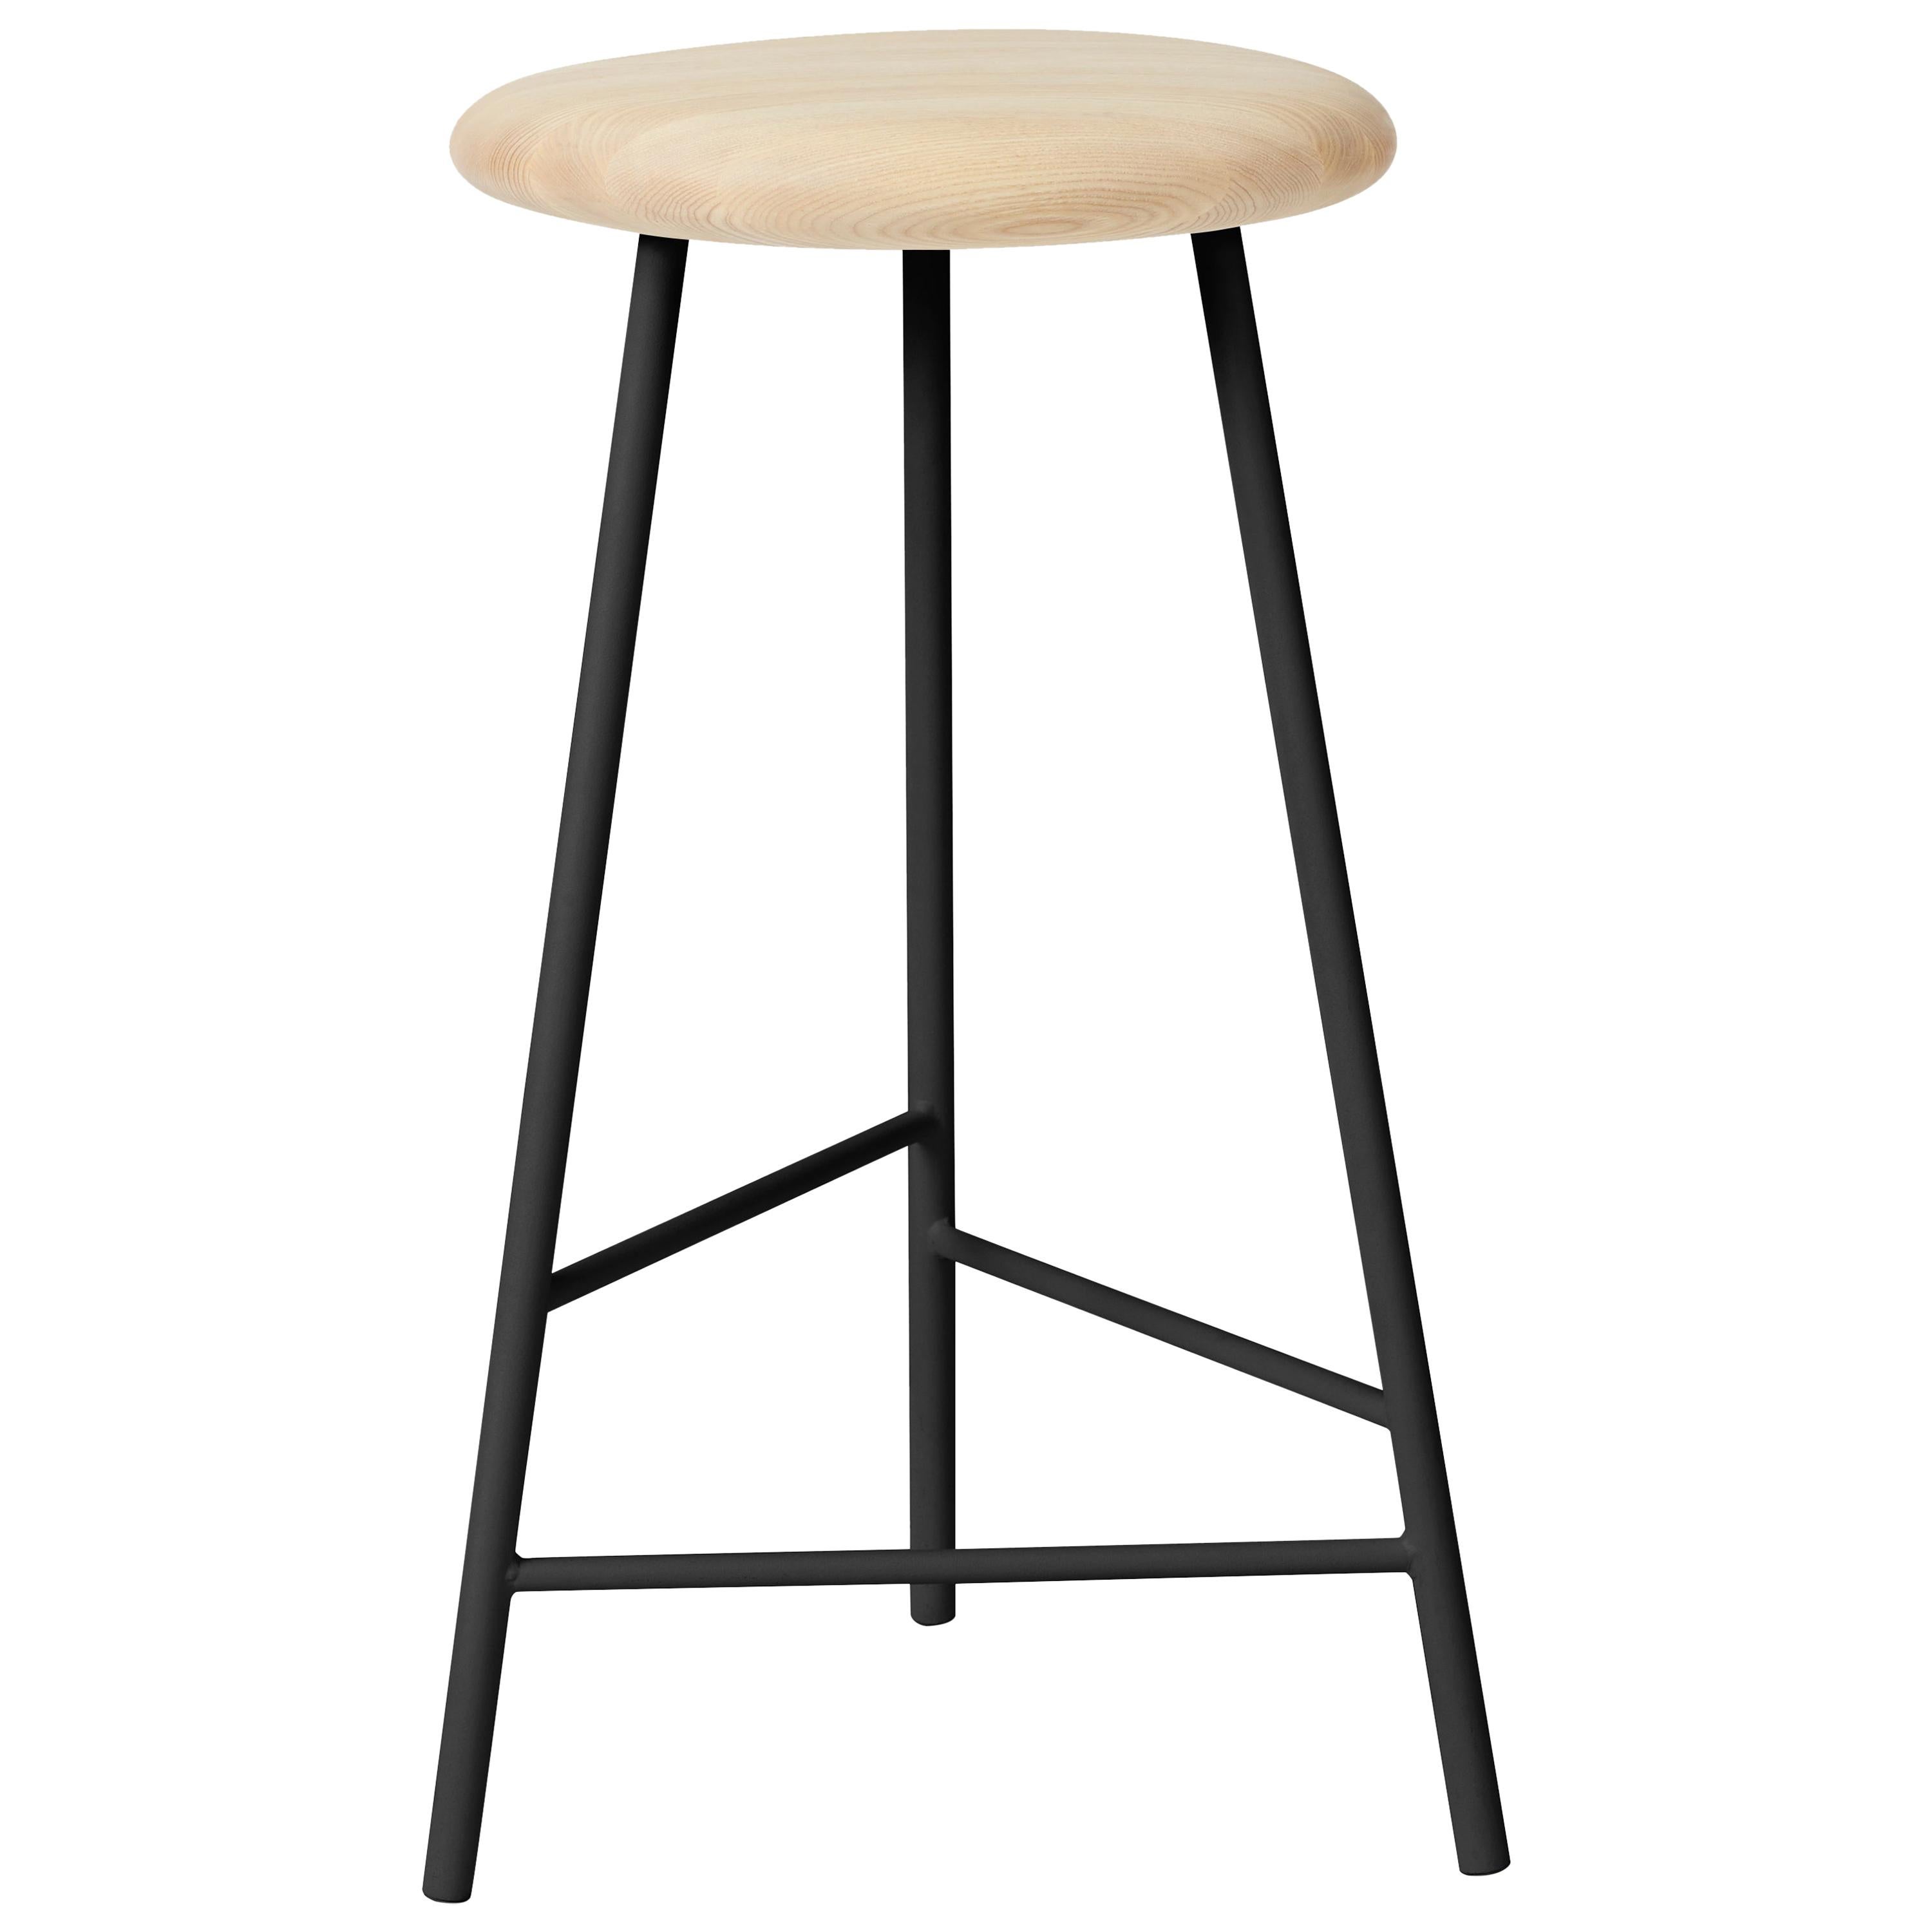 Pebble Counter Stool, by Welling / Ludvik from Warm Nordic